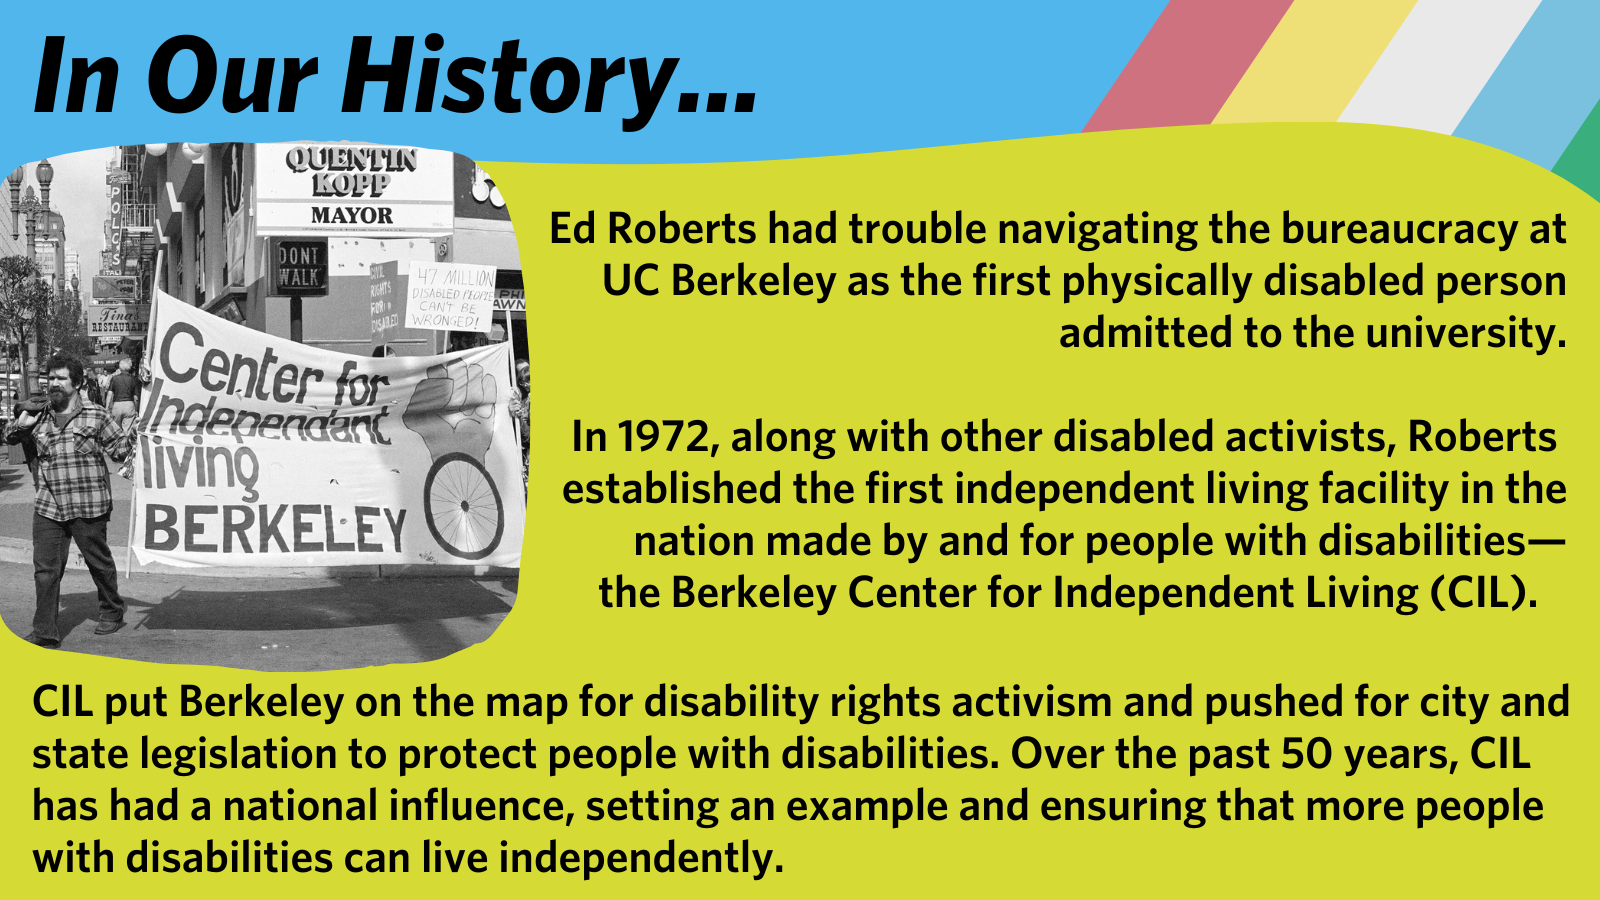 In 1972, along with other disabled activists, Ed Roberts  established the first independent living facility in the nation made by and for people with disabilities— the Berkeley Center for Independent Living